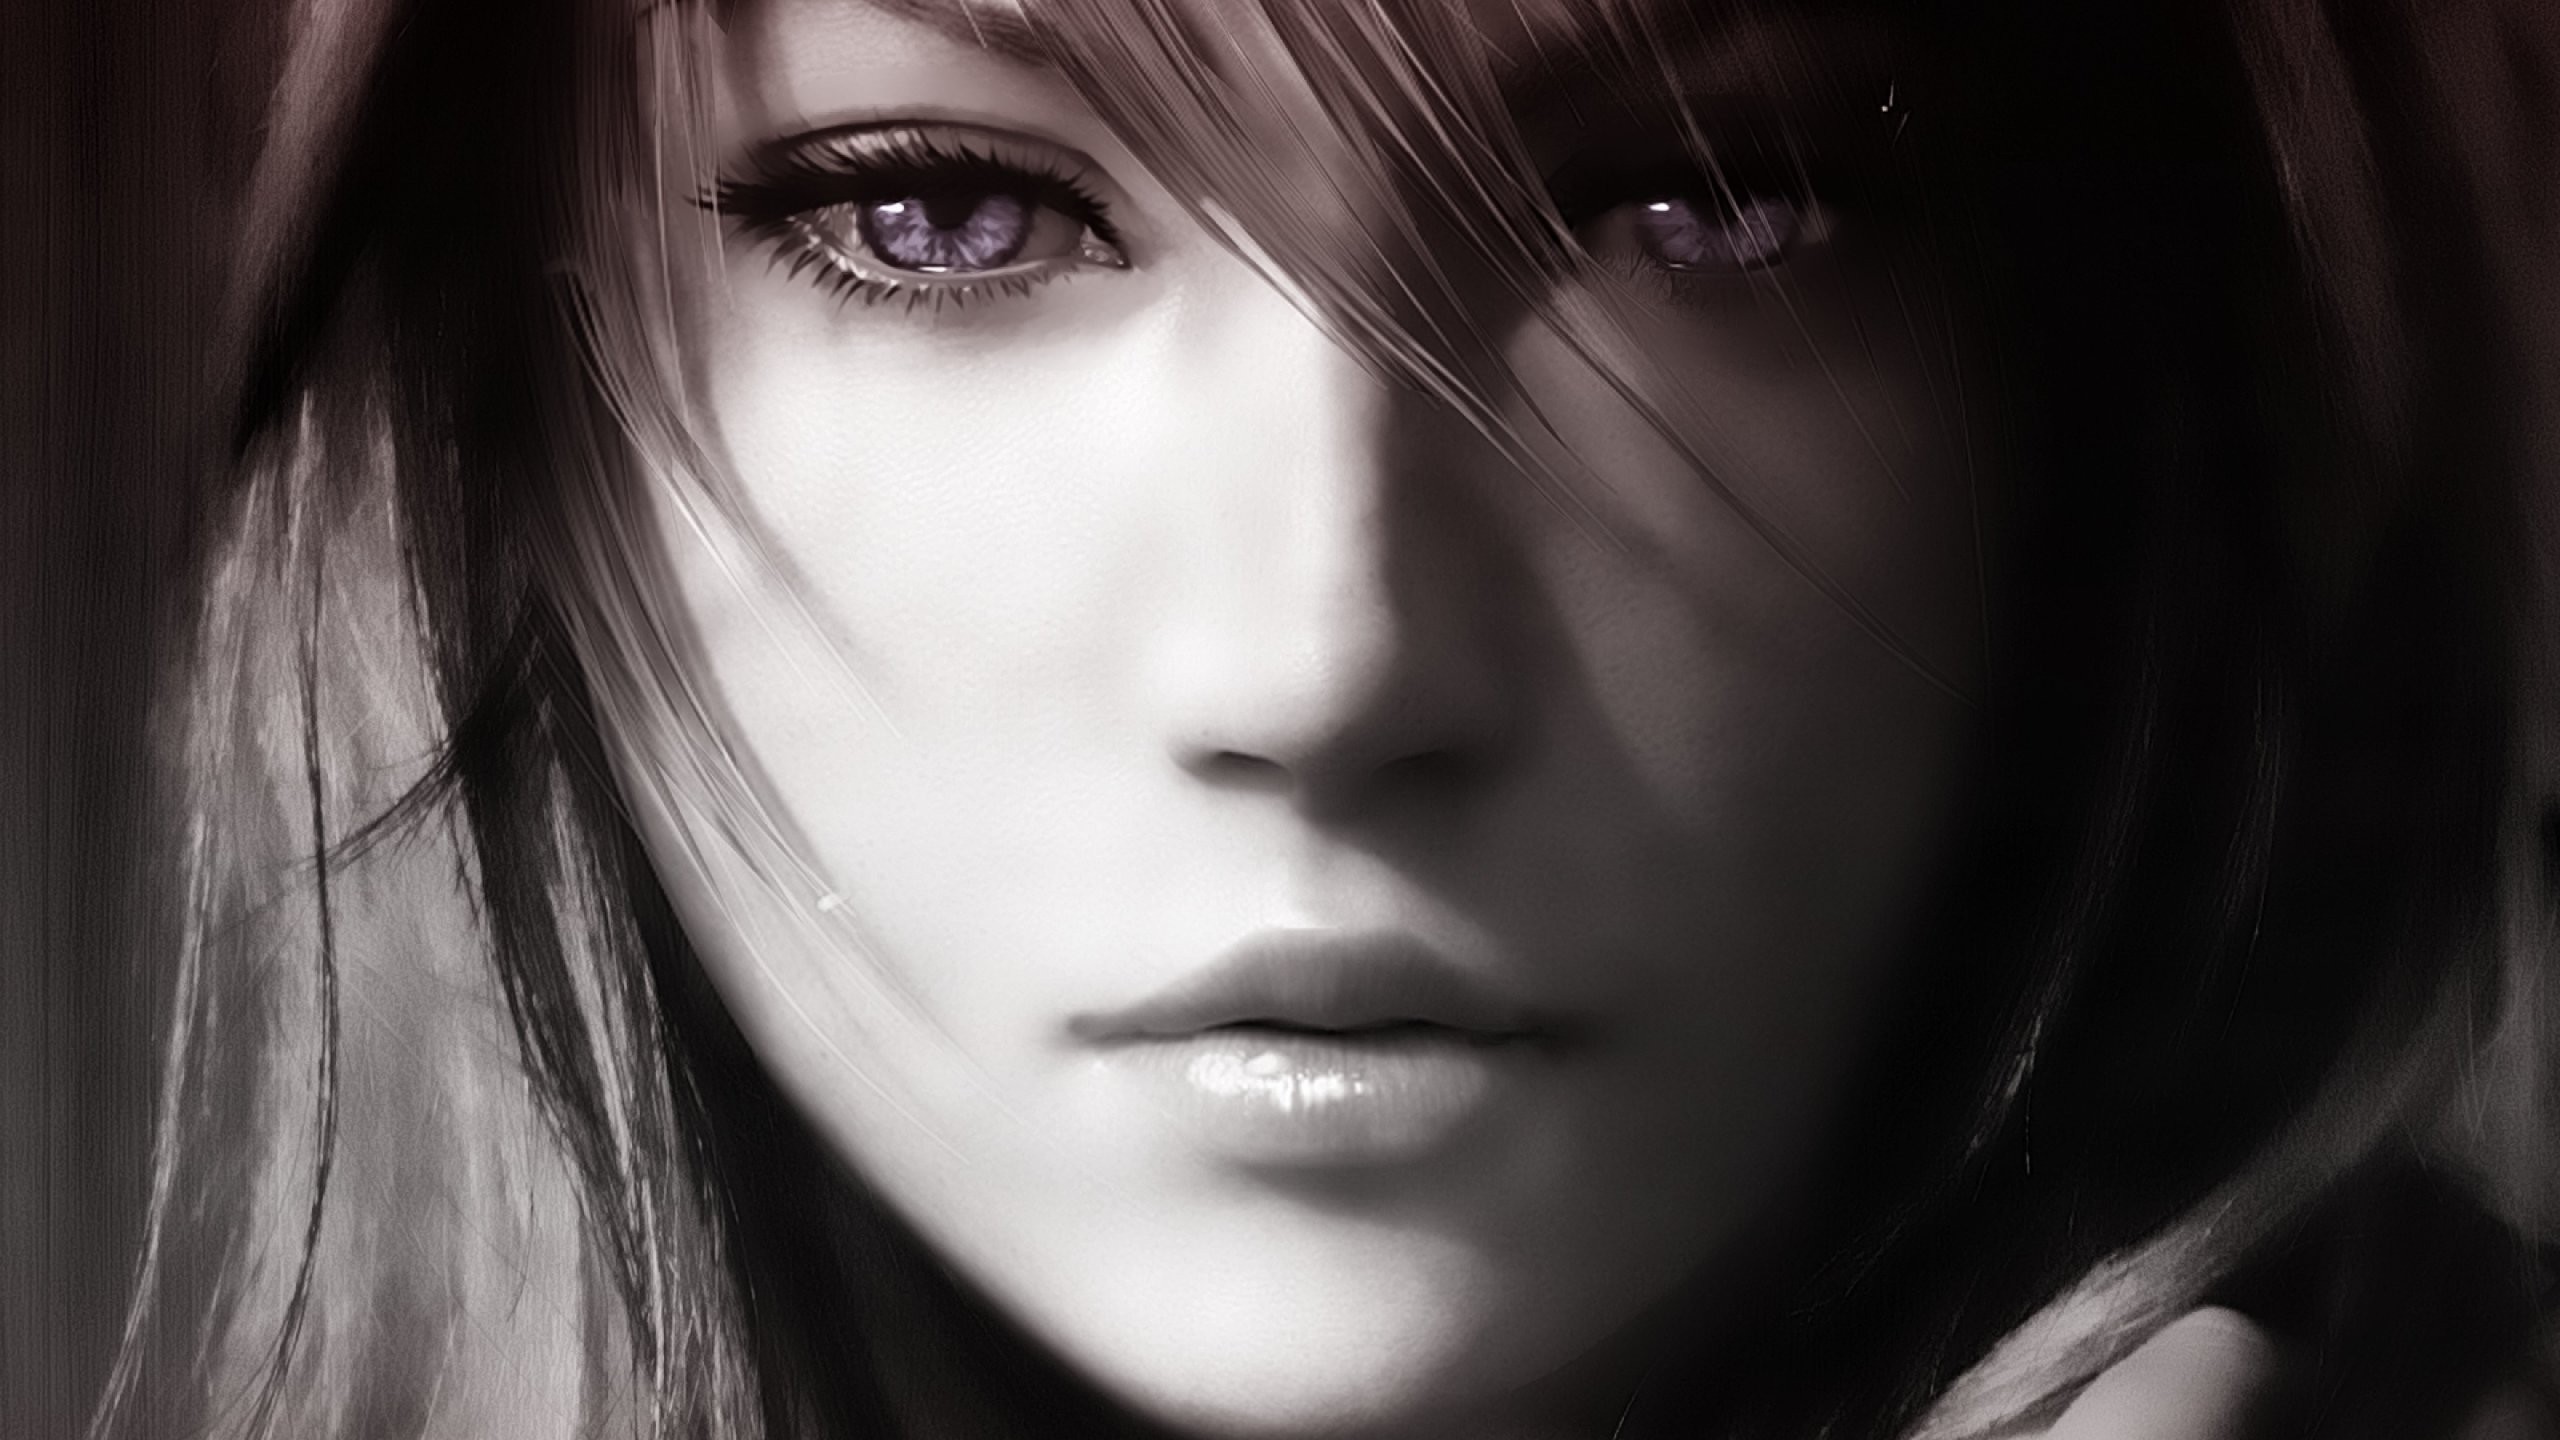 Final Fantasy Xiii Claire Farron Video Game Heroes Anime Girls Anime Video Games Face 2560x1440